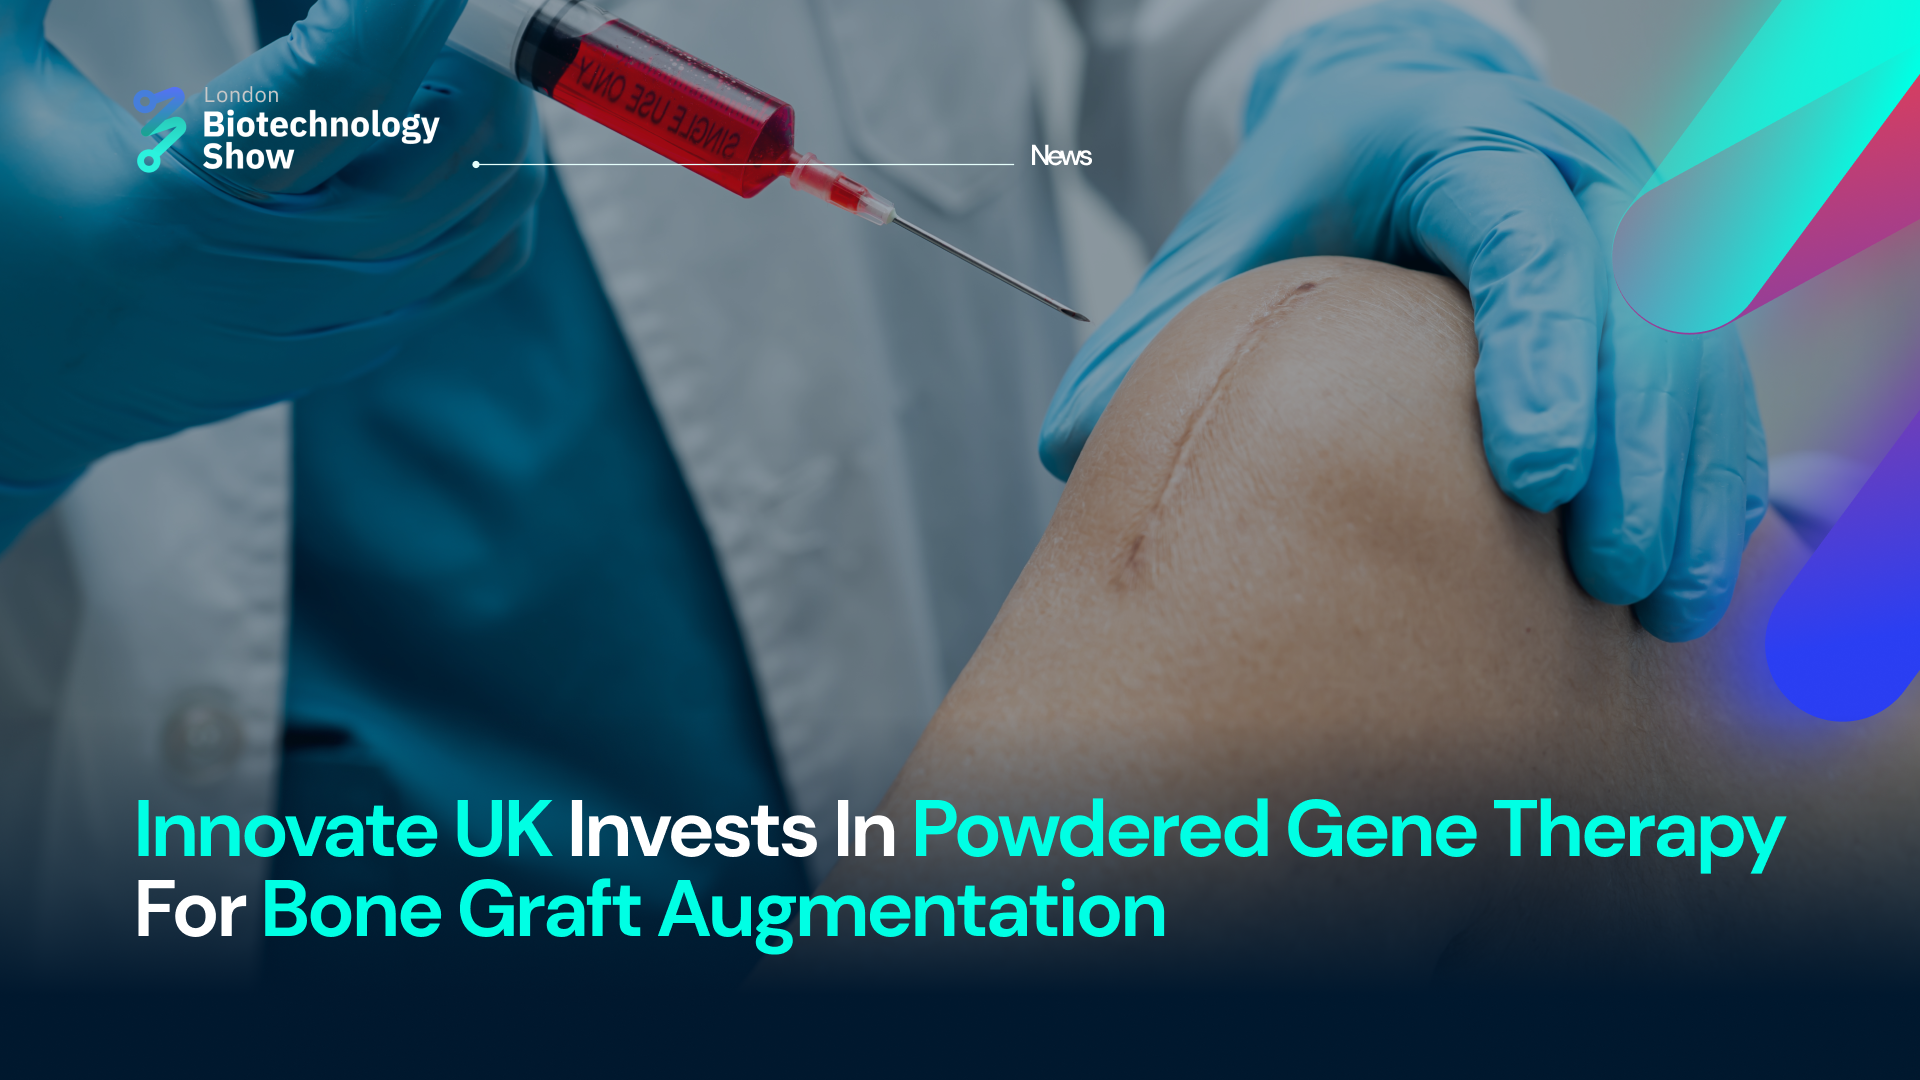 Innovate UK Invests In Powdered Gene Therapy For Bone Graft Augmentation